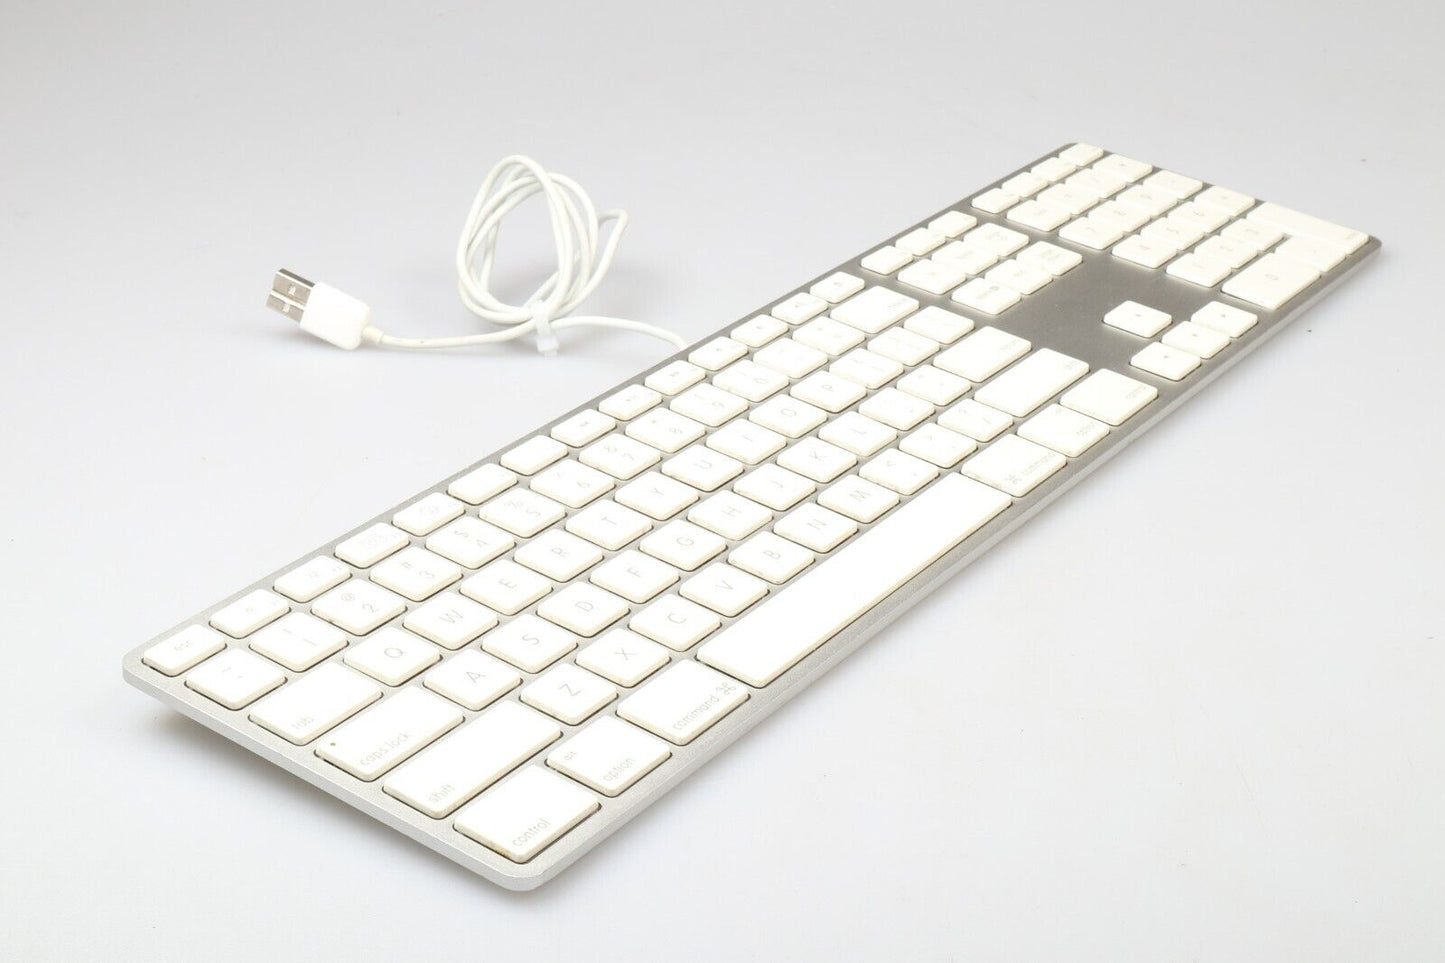 Apple Keyboard A1243 | Wired | White